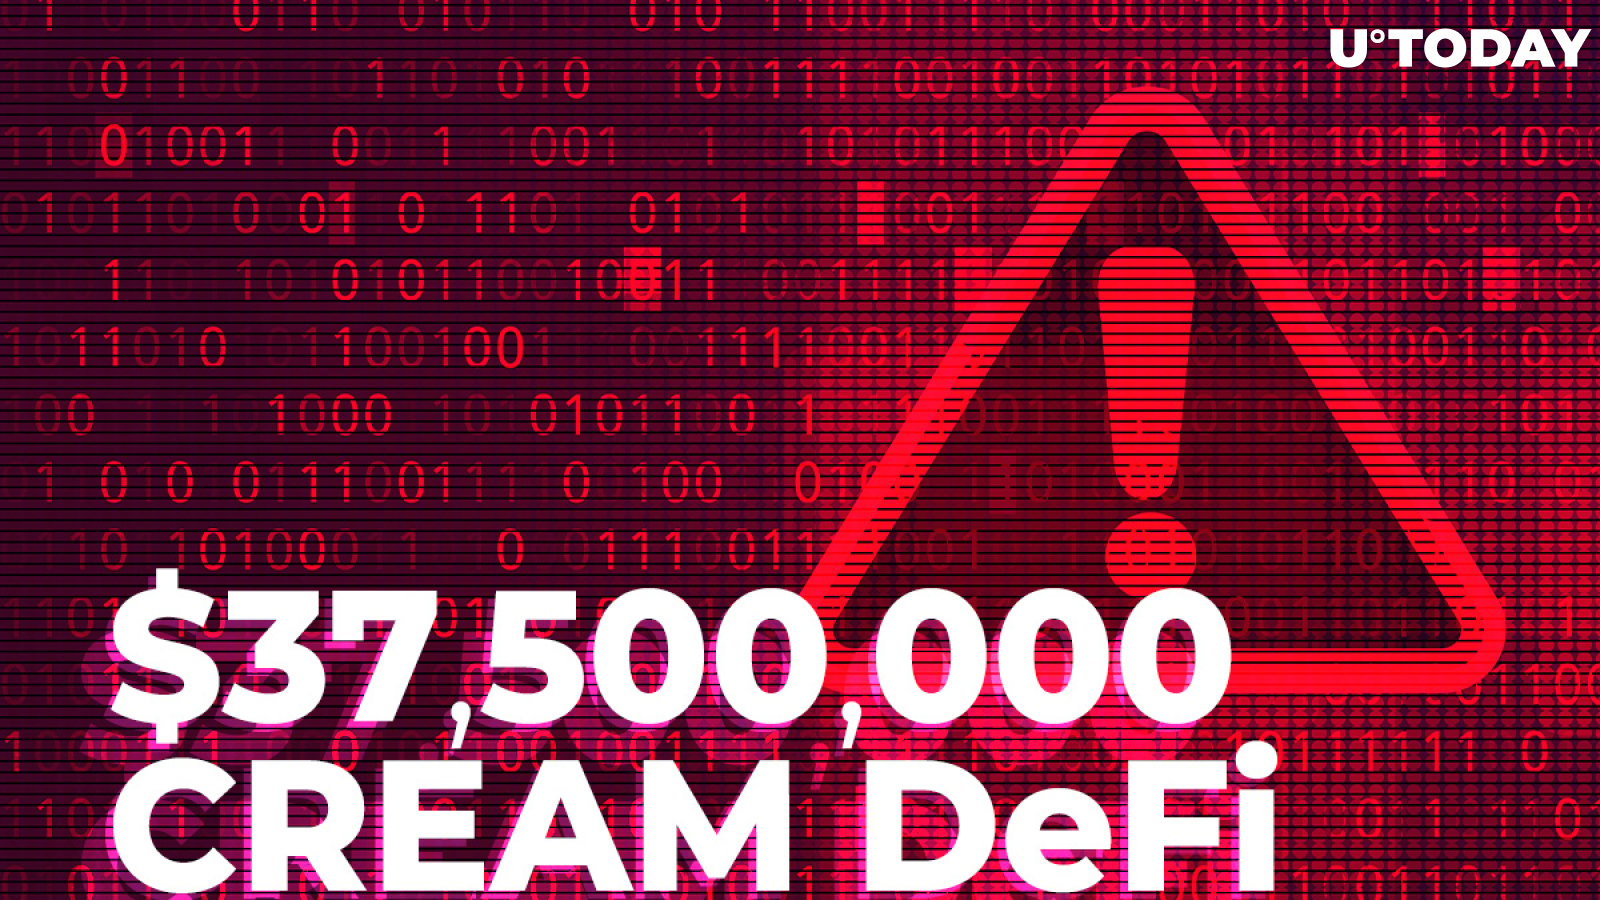 $37,500,000 Lost by CREAM DeFi in Largest Flash-Loan Attack Ever